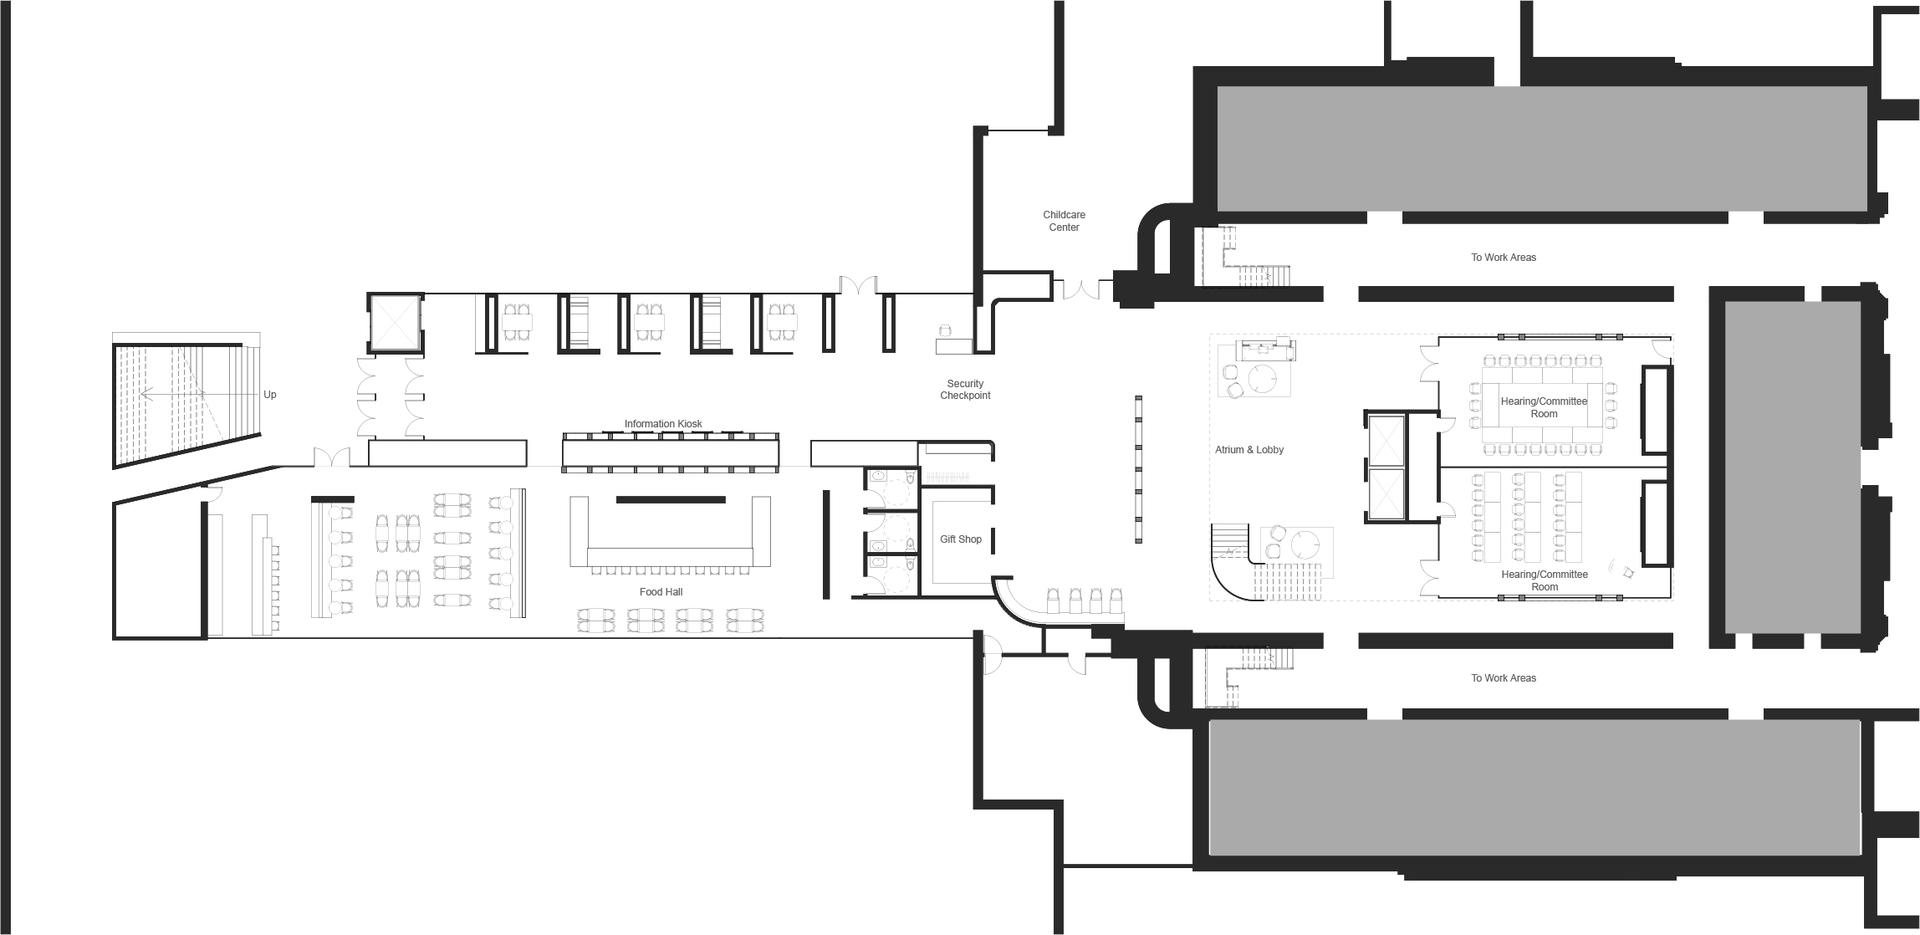 A furnished floor plan depicting a large addition, main entry, food hall and meeting spaces.